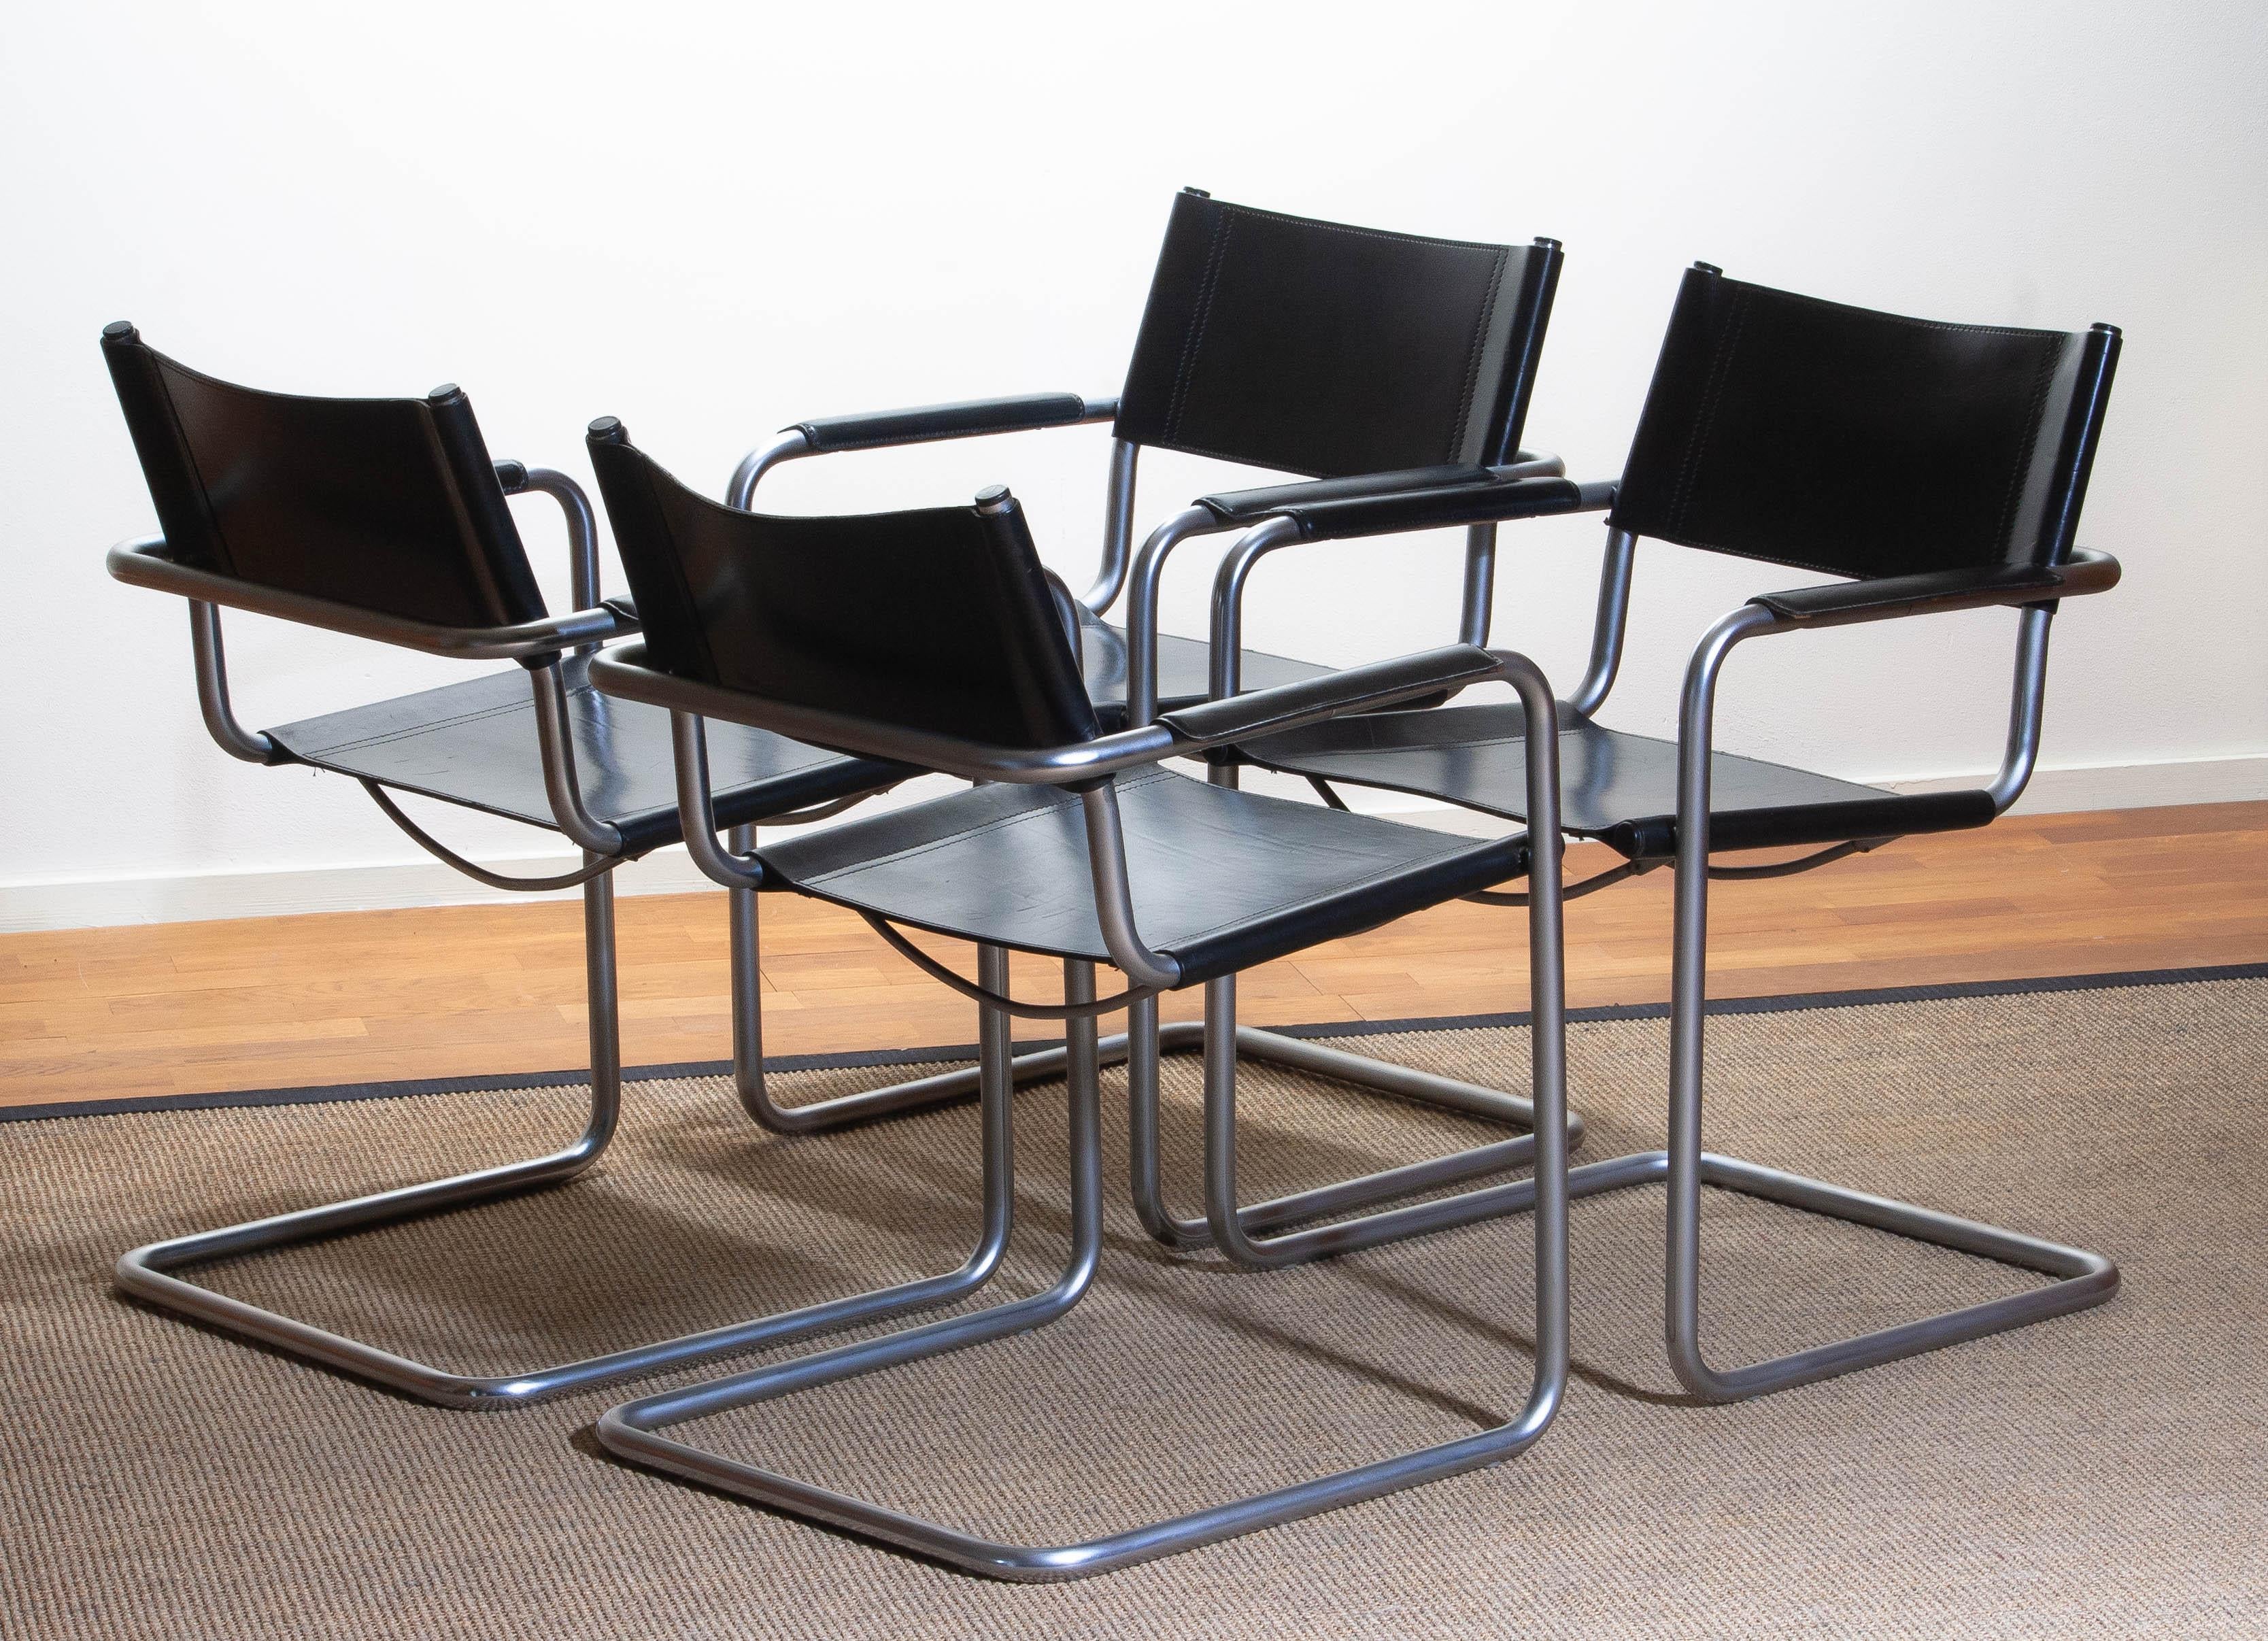 1970, perfect set of four dining or office chairs made by Matteo Grassi, Italy. 
The chairs have tubular titanium look steel frames with sturdy black leather seating and backrest. 
They are signed on the back of the backrest. 
Overall condition